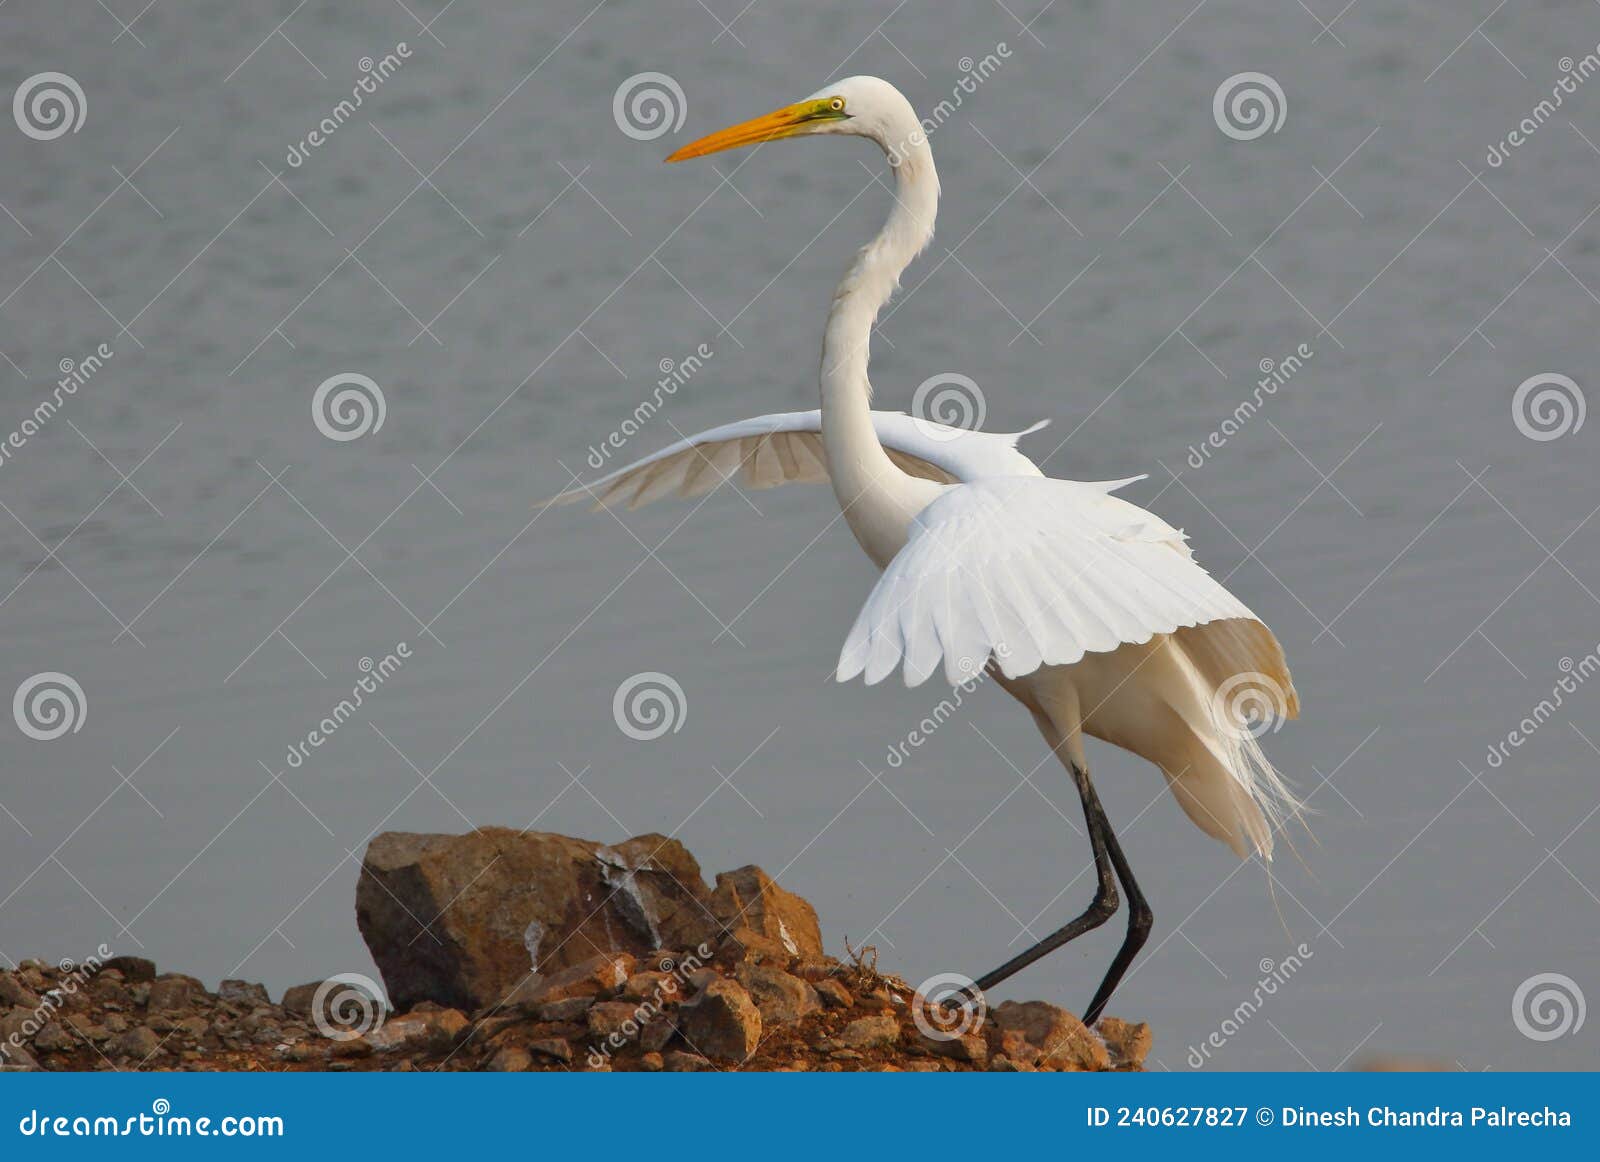 Exotic Bird Great Egret White Heron Widespread Egret With Four Subspecies  Found In Asia Africa America And Southern Europe Wallpaper Hd For Desktop  3840x2160  Wallpapers13com